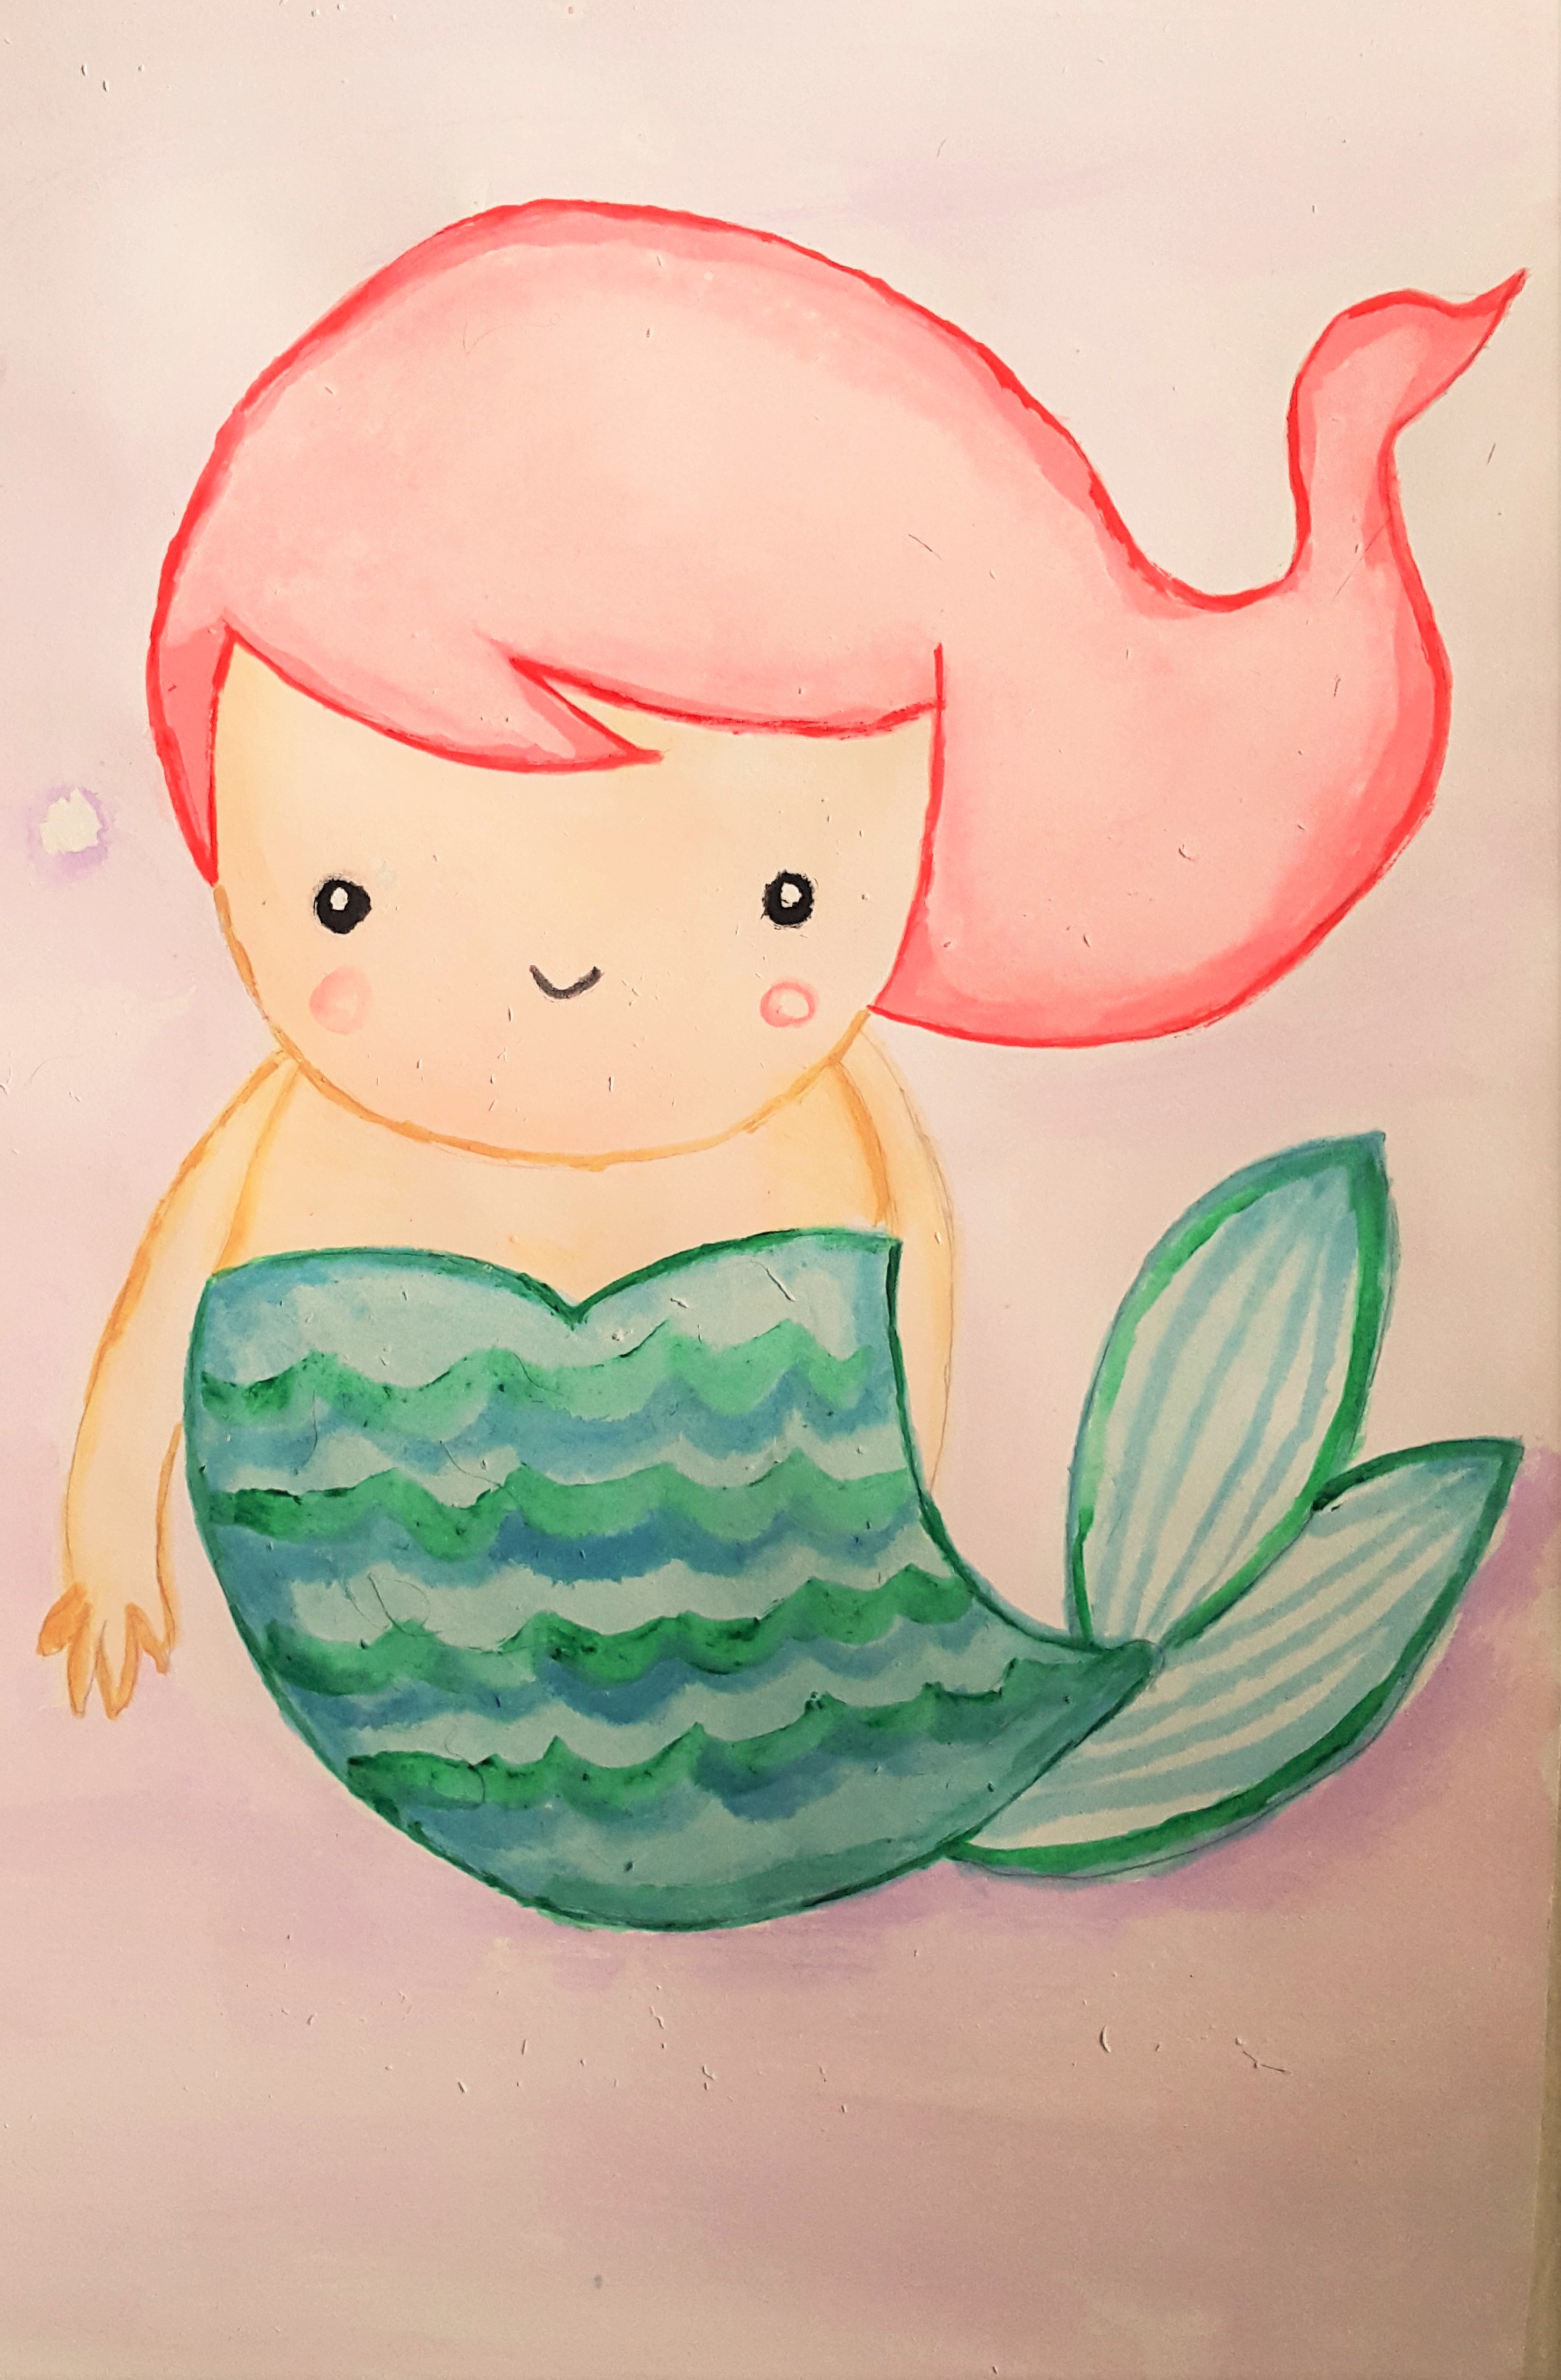 How To Draw A Mermaid Drawings Doodle Drawings Easy Drawings | Images ...